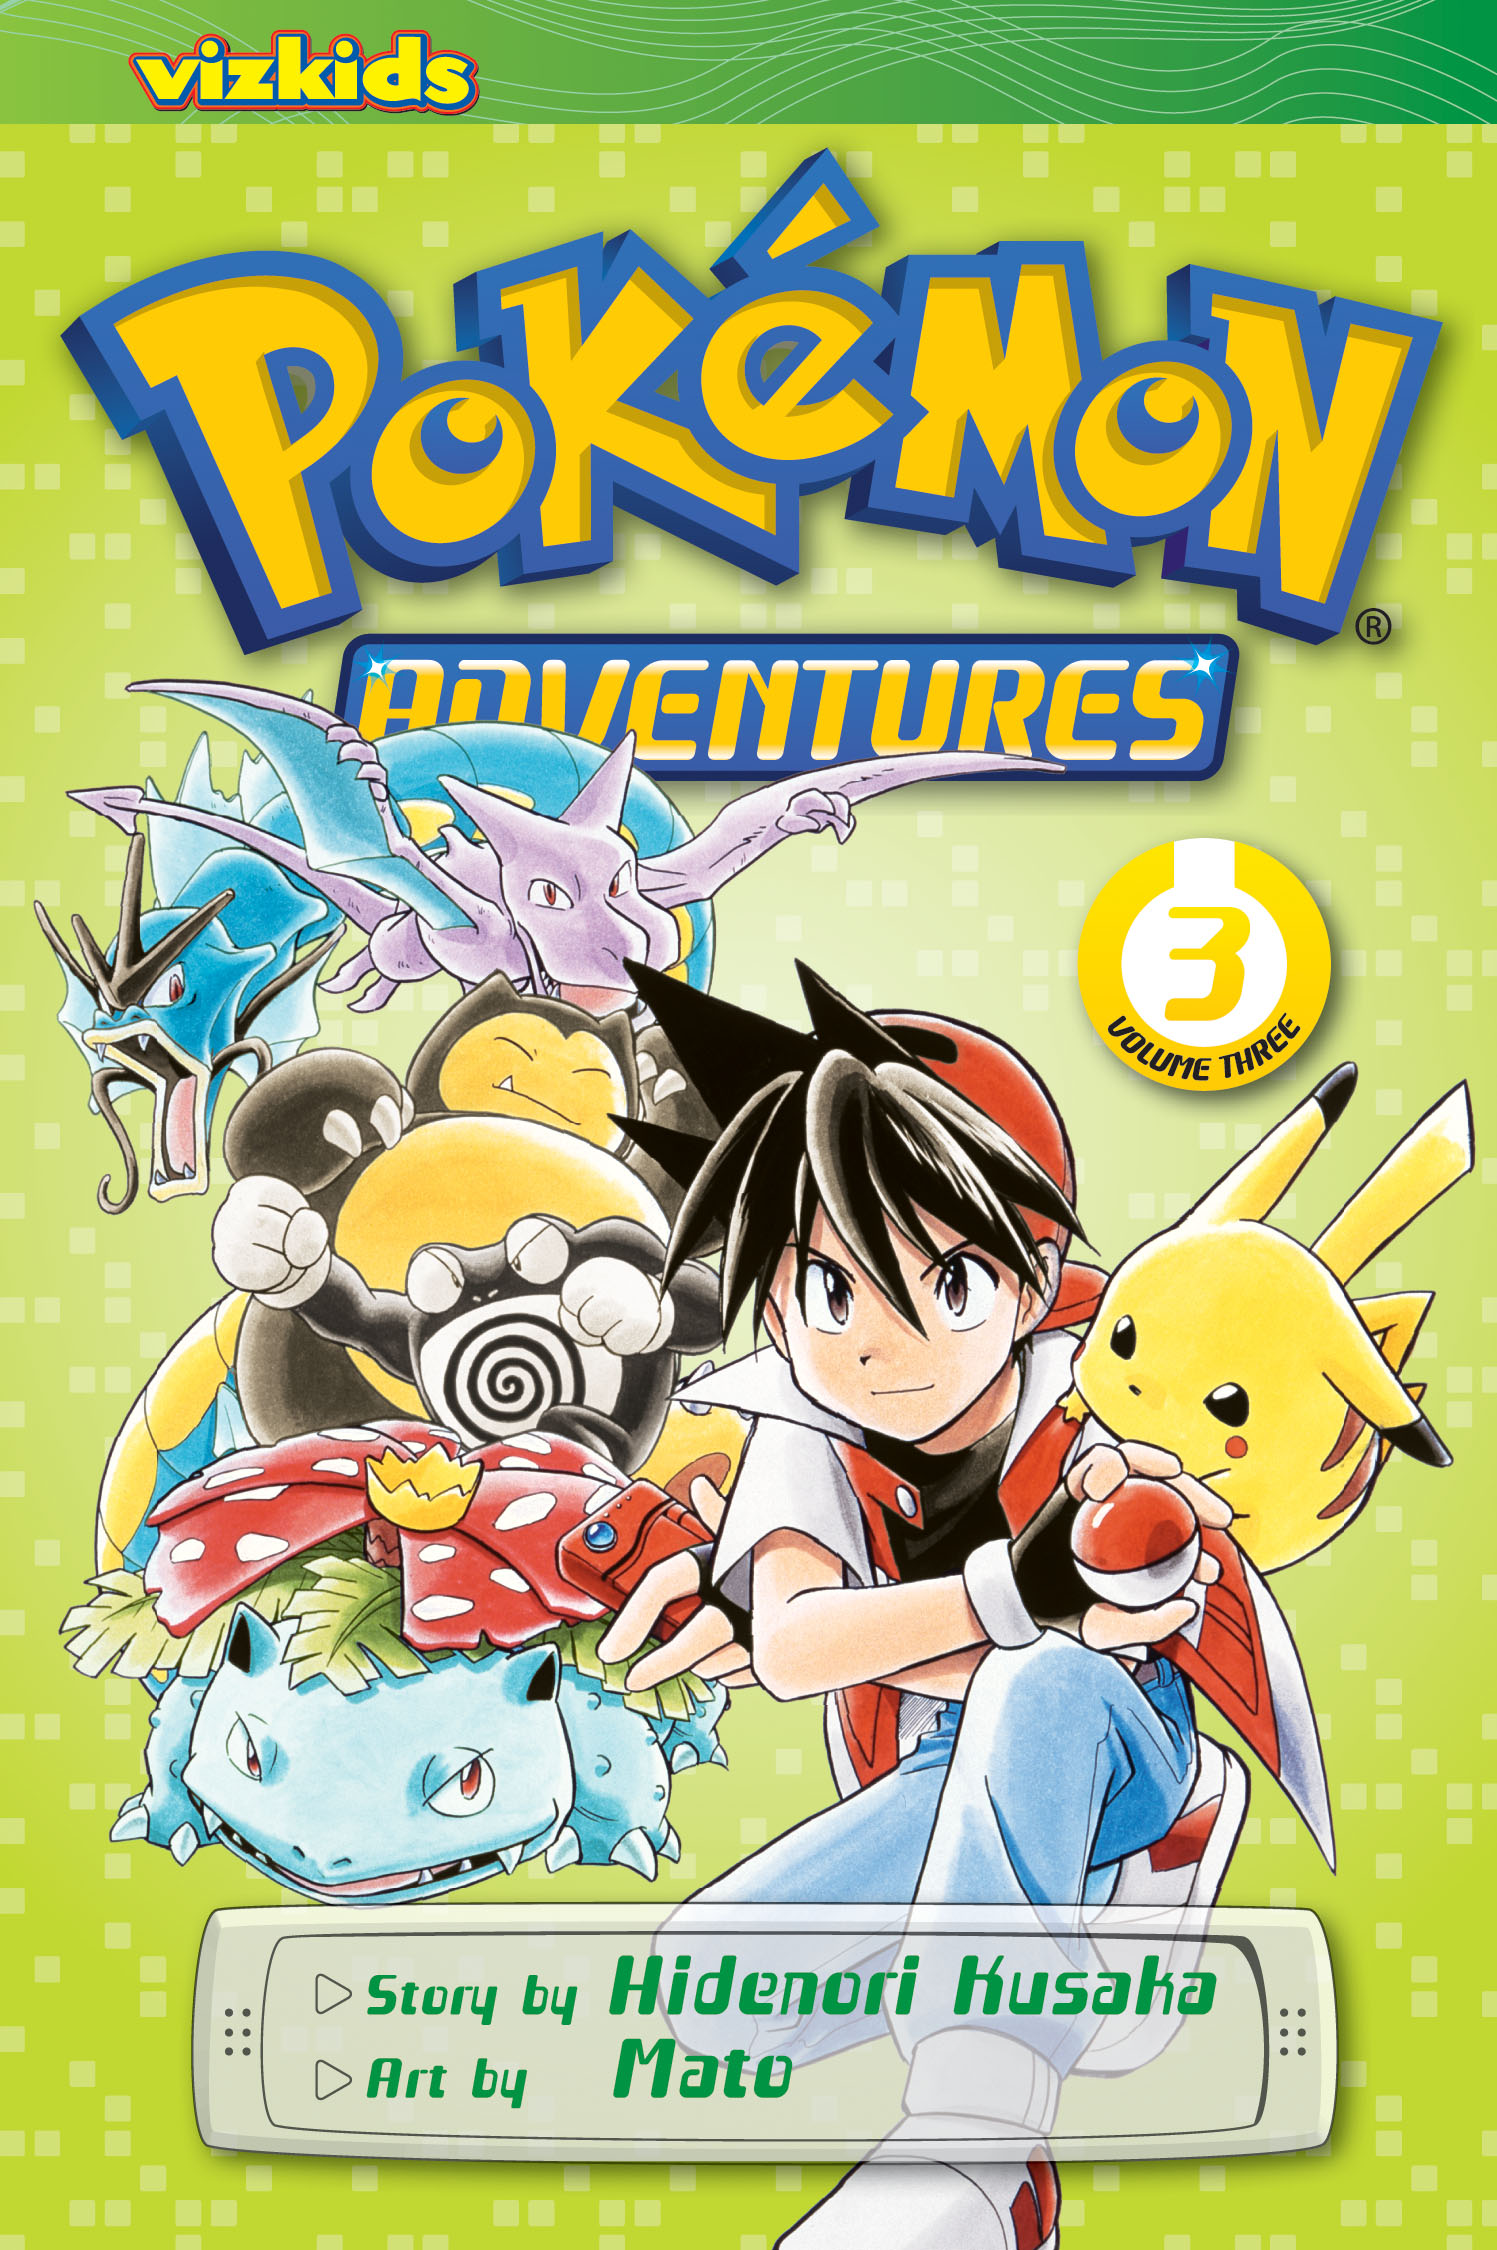 Boxart for Pokemon Adventure Chapter Red/Blue/Yellow/Green.